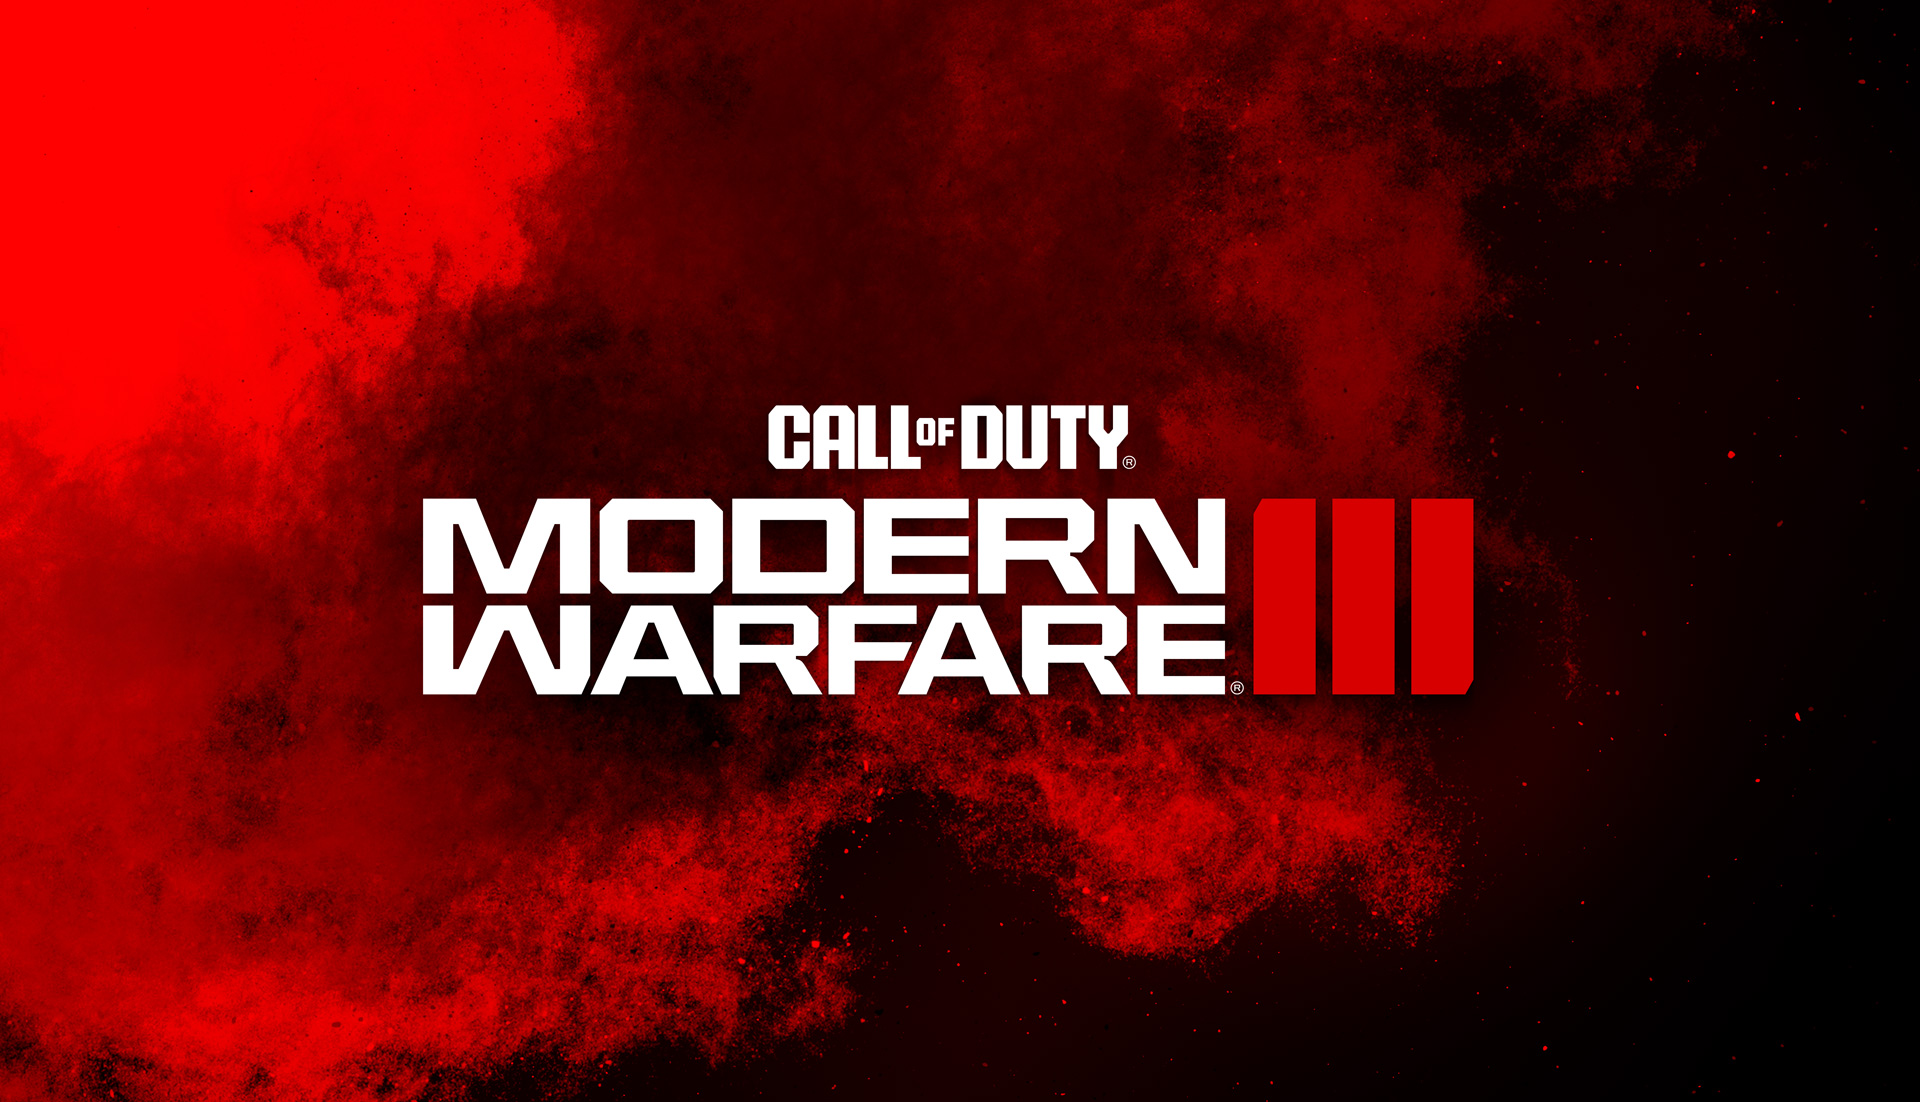 Call of Duty Modern Warfare 3 Not an Expansion or Add-On But a